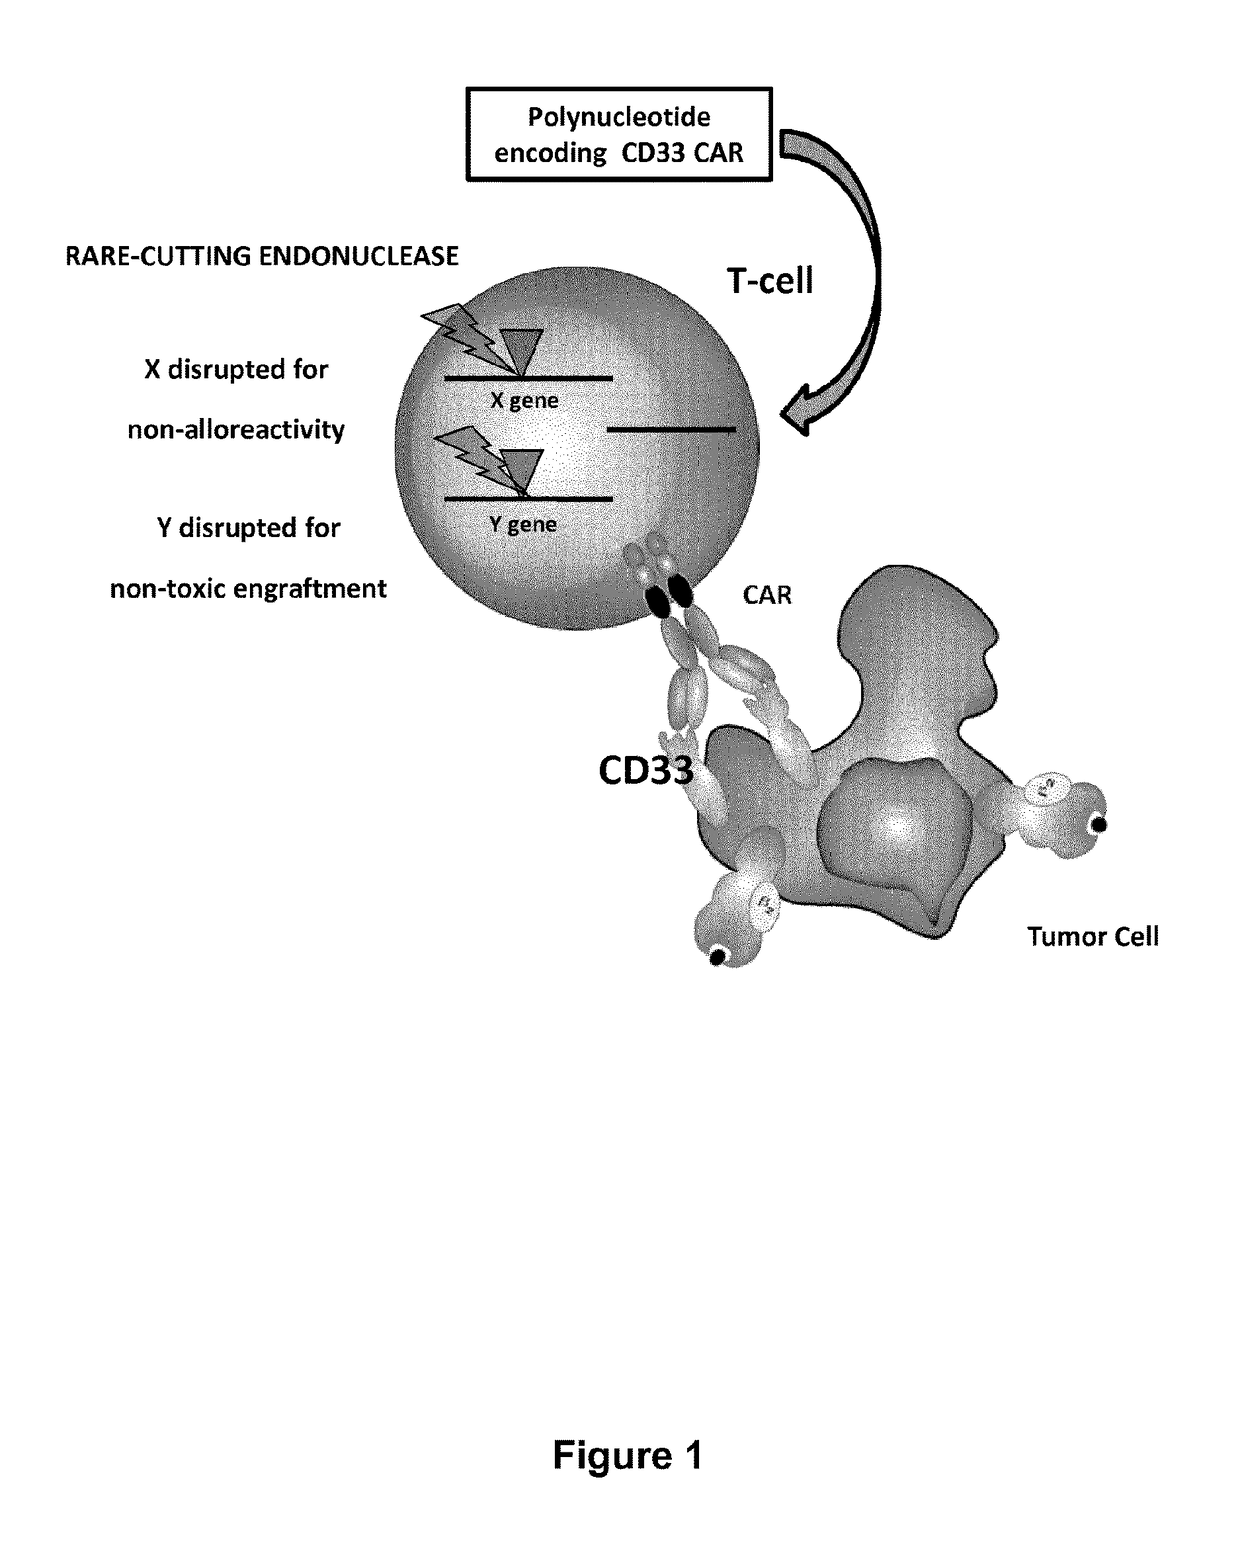 CD33 specific chimeric antigen receptors for cancer immunotherapy